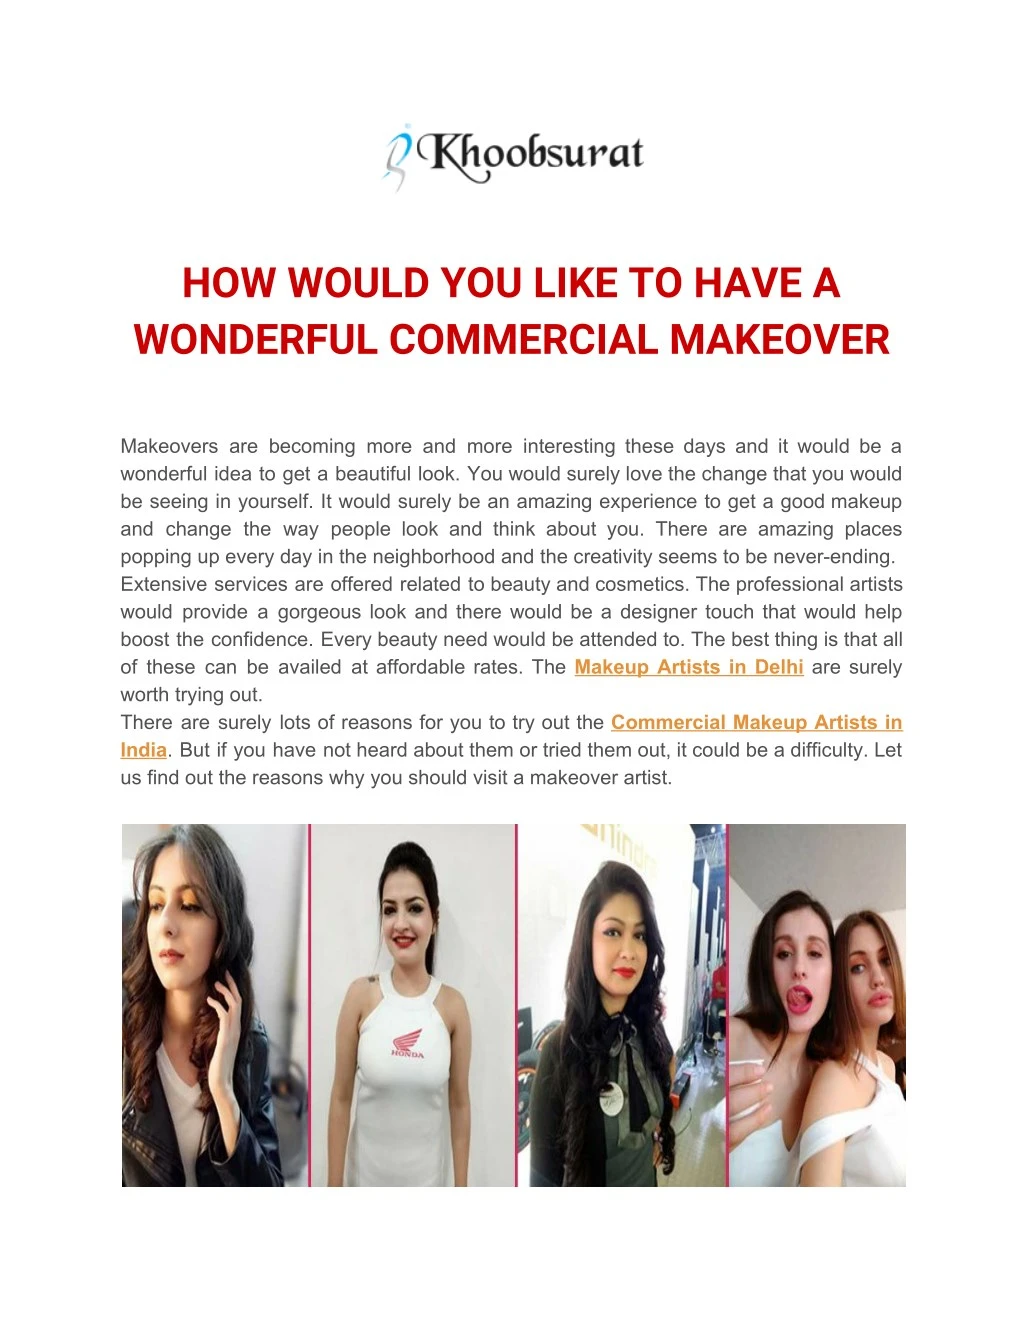 how would you like to have a wonderful commercial